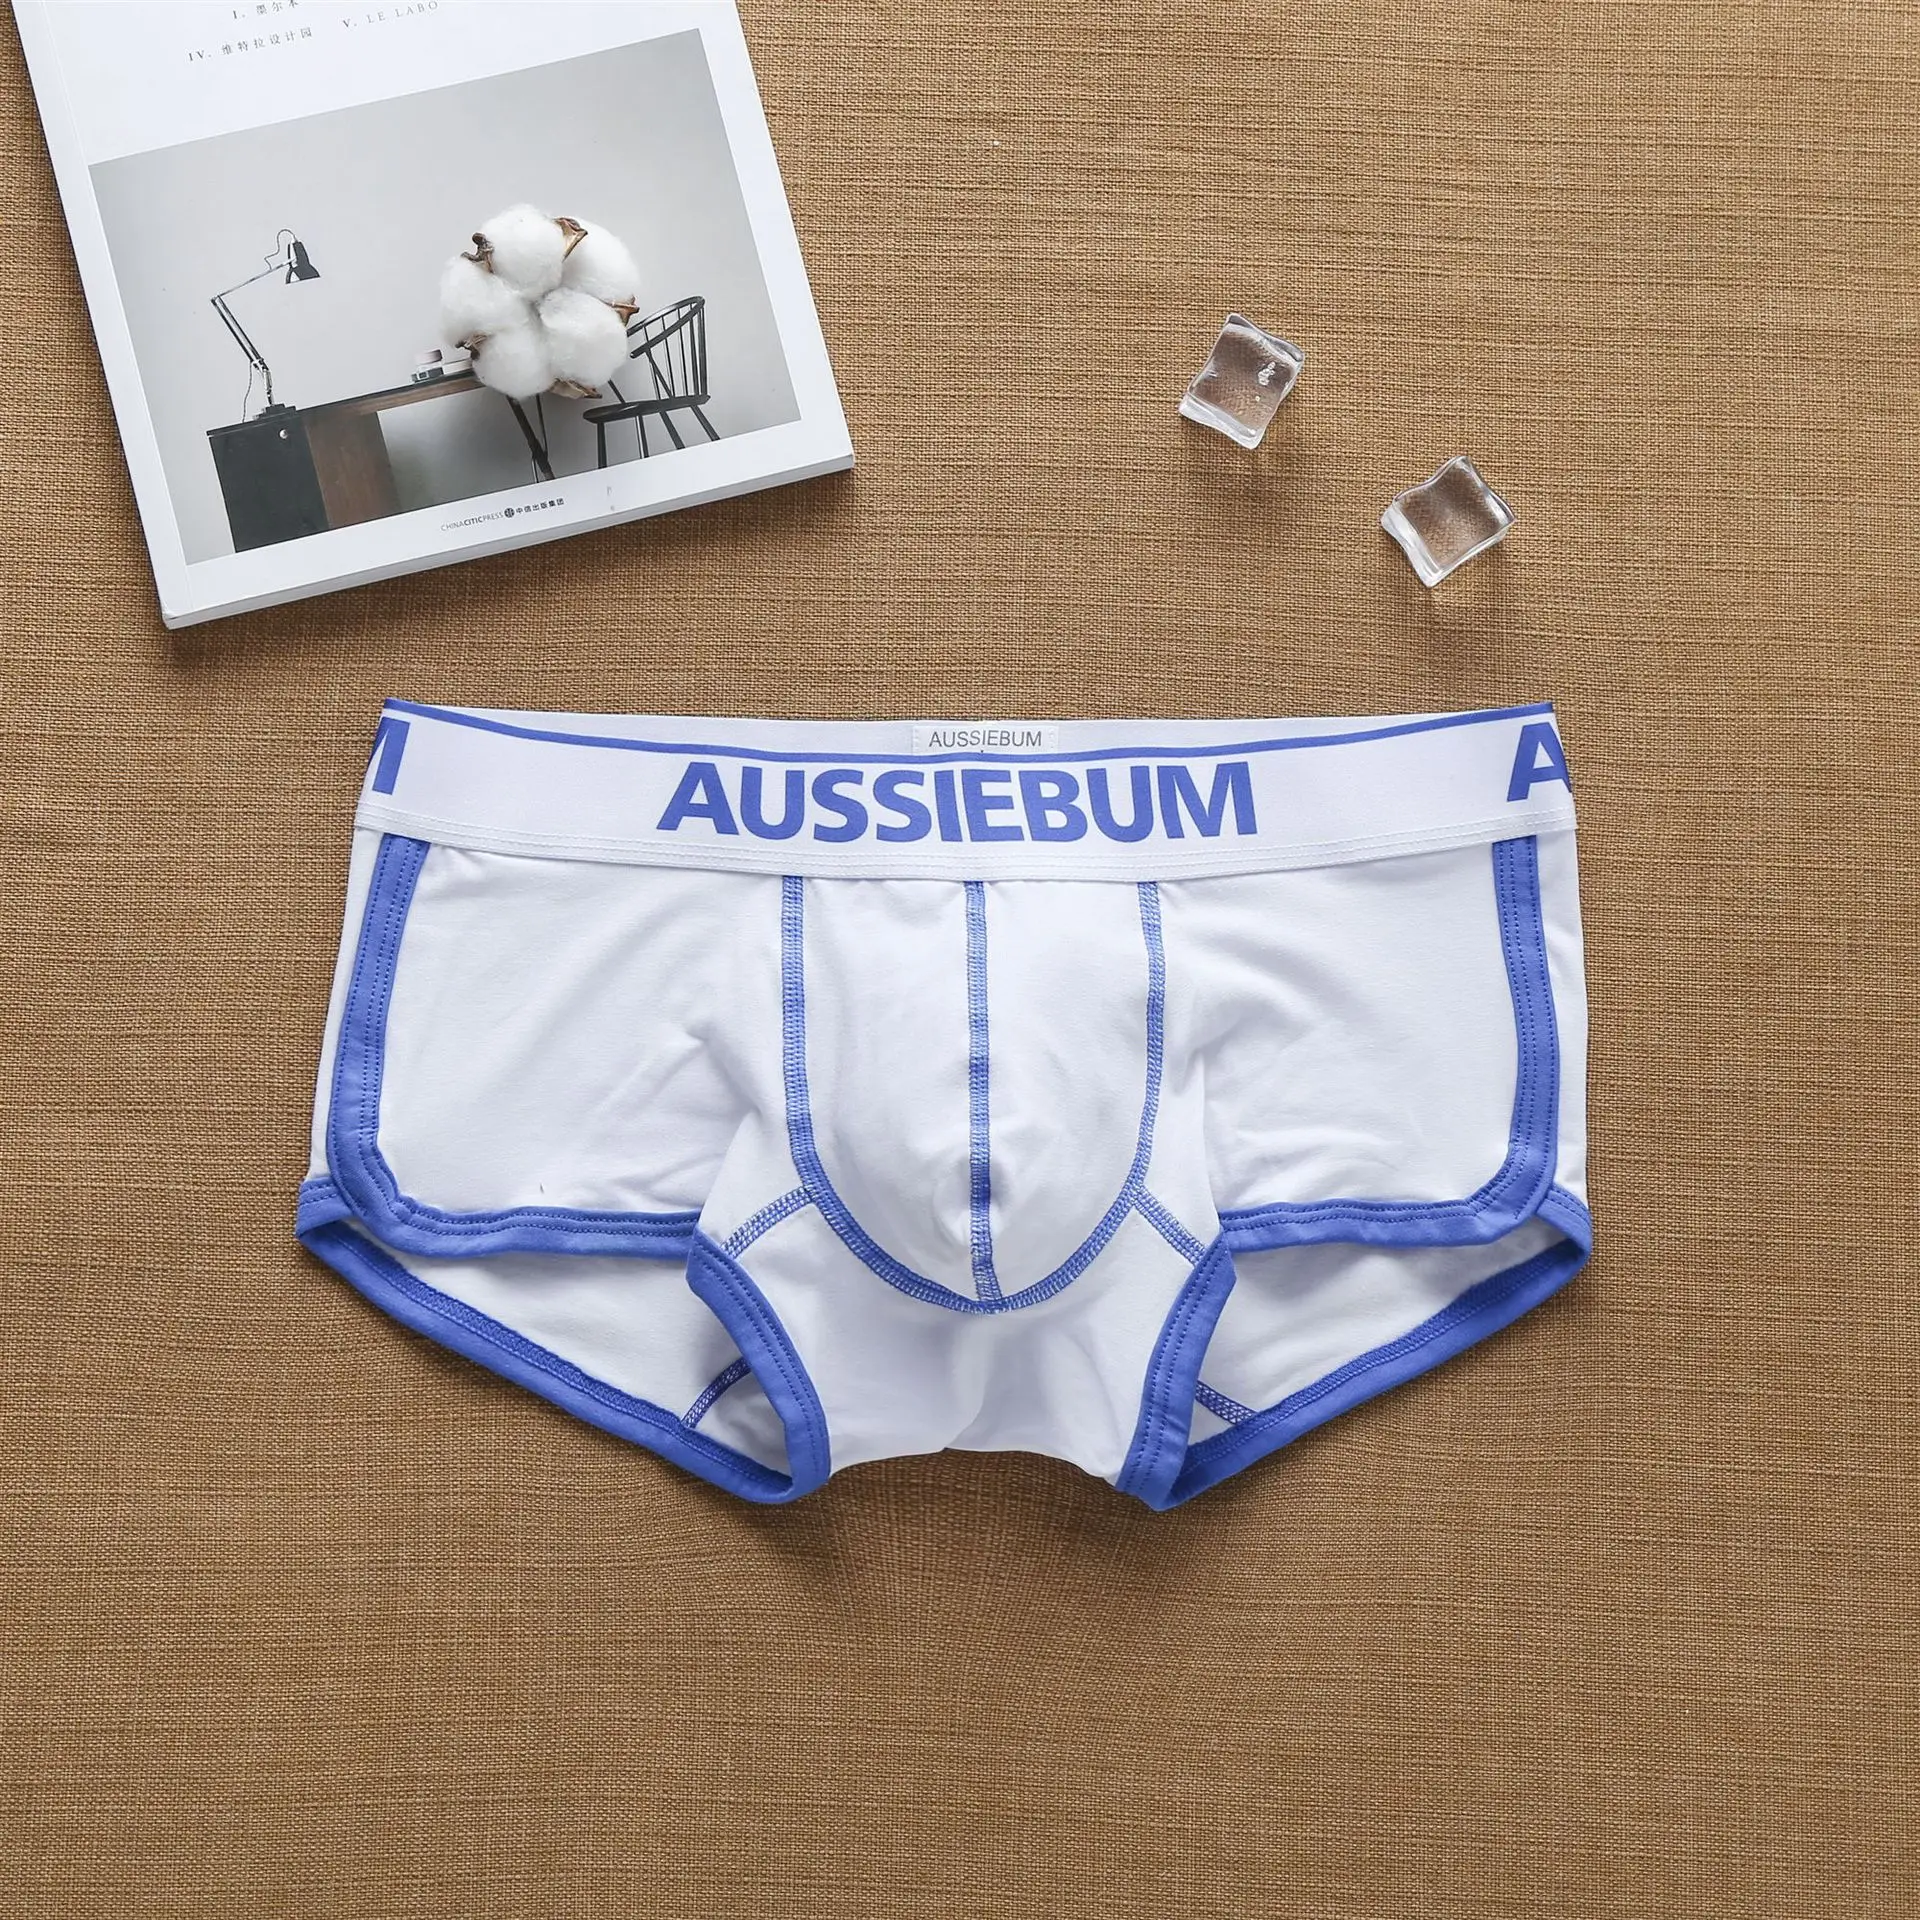 trunk underwear Aussiebum men's cotton panties low-waisted letter tide comfortable sweat-absorbing flat-angle pants pants cool boxers